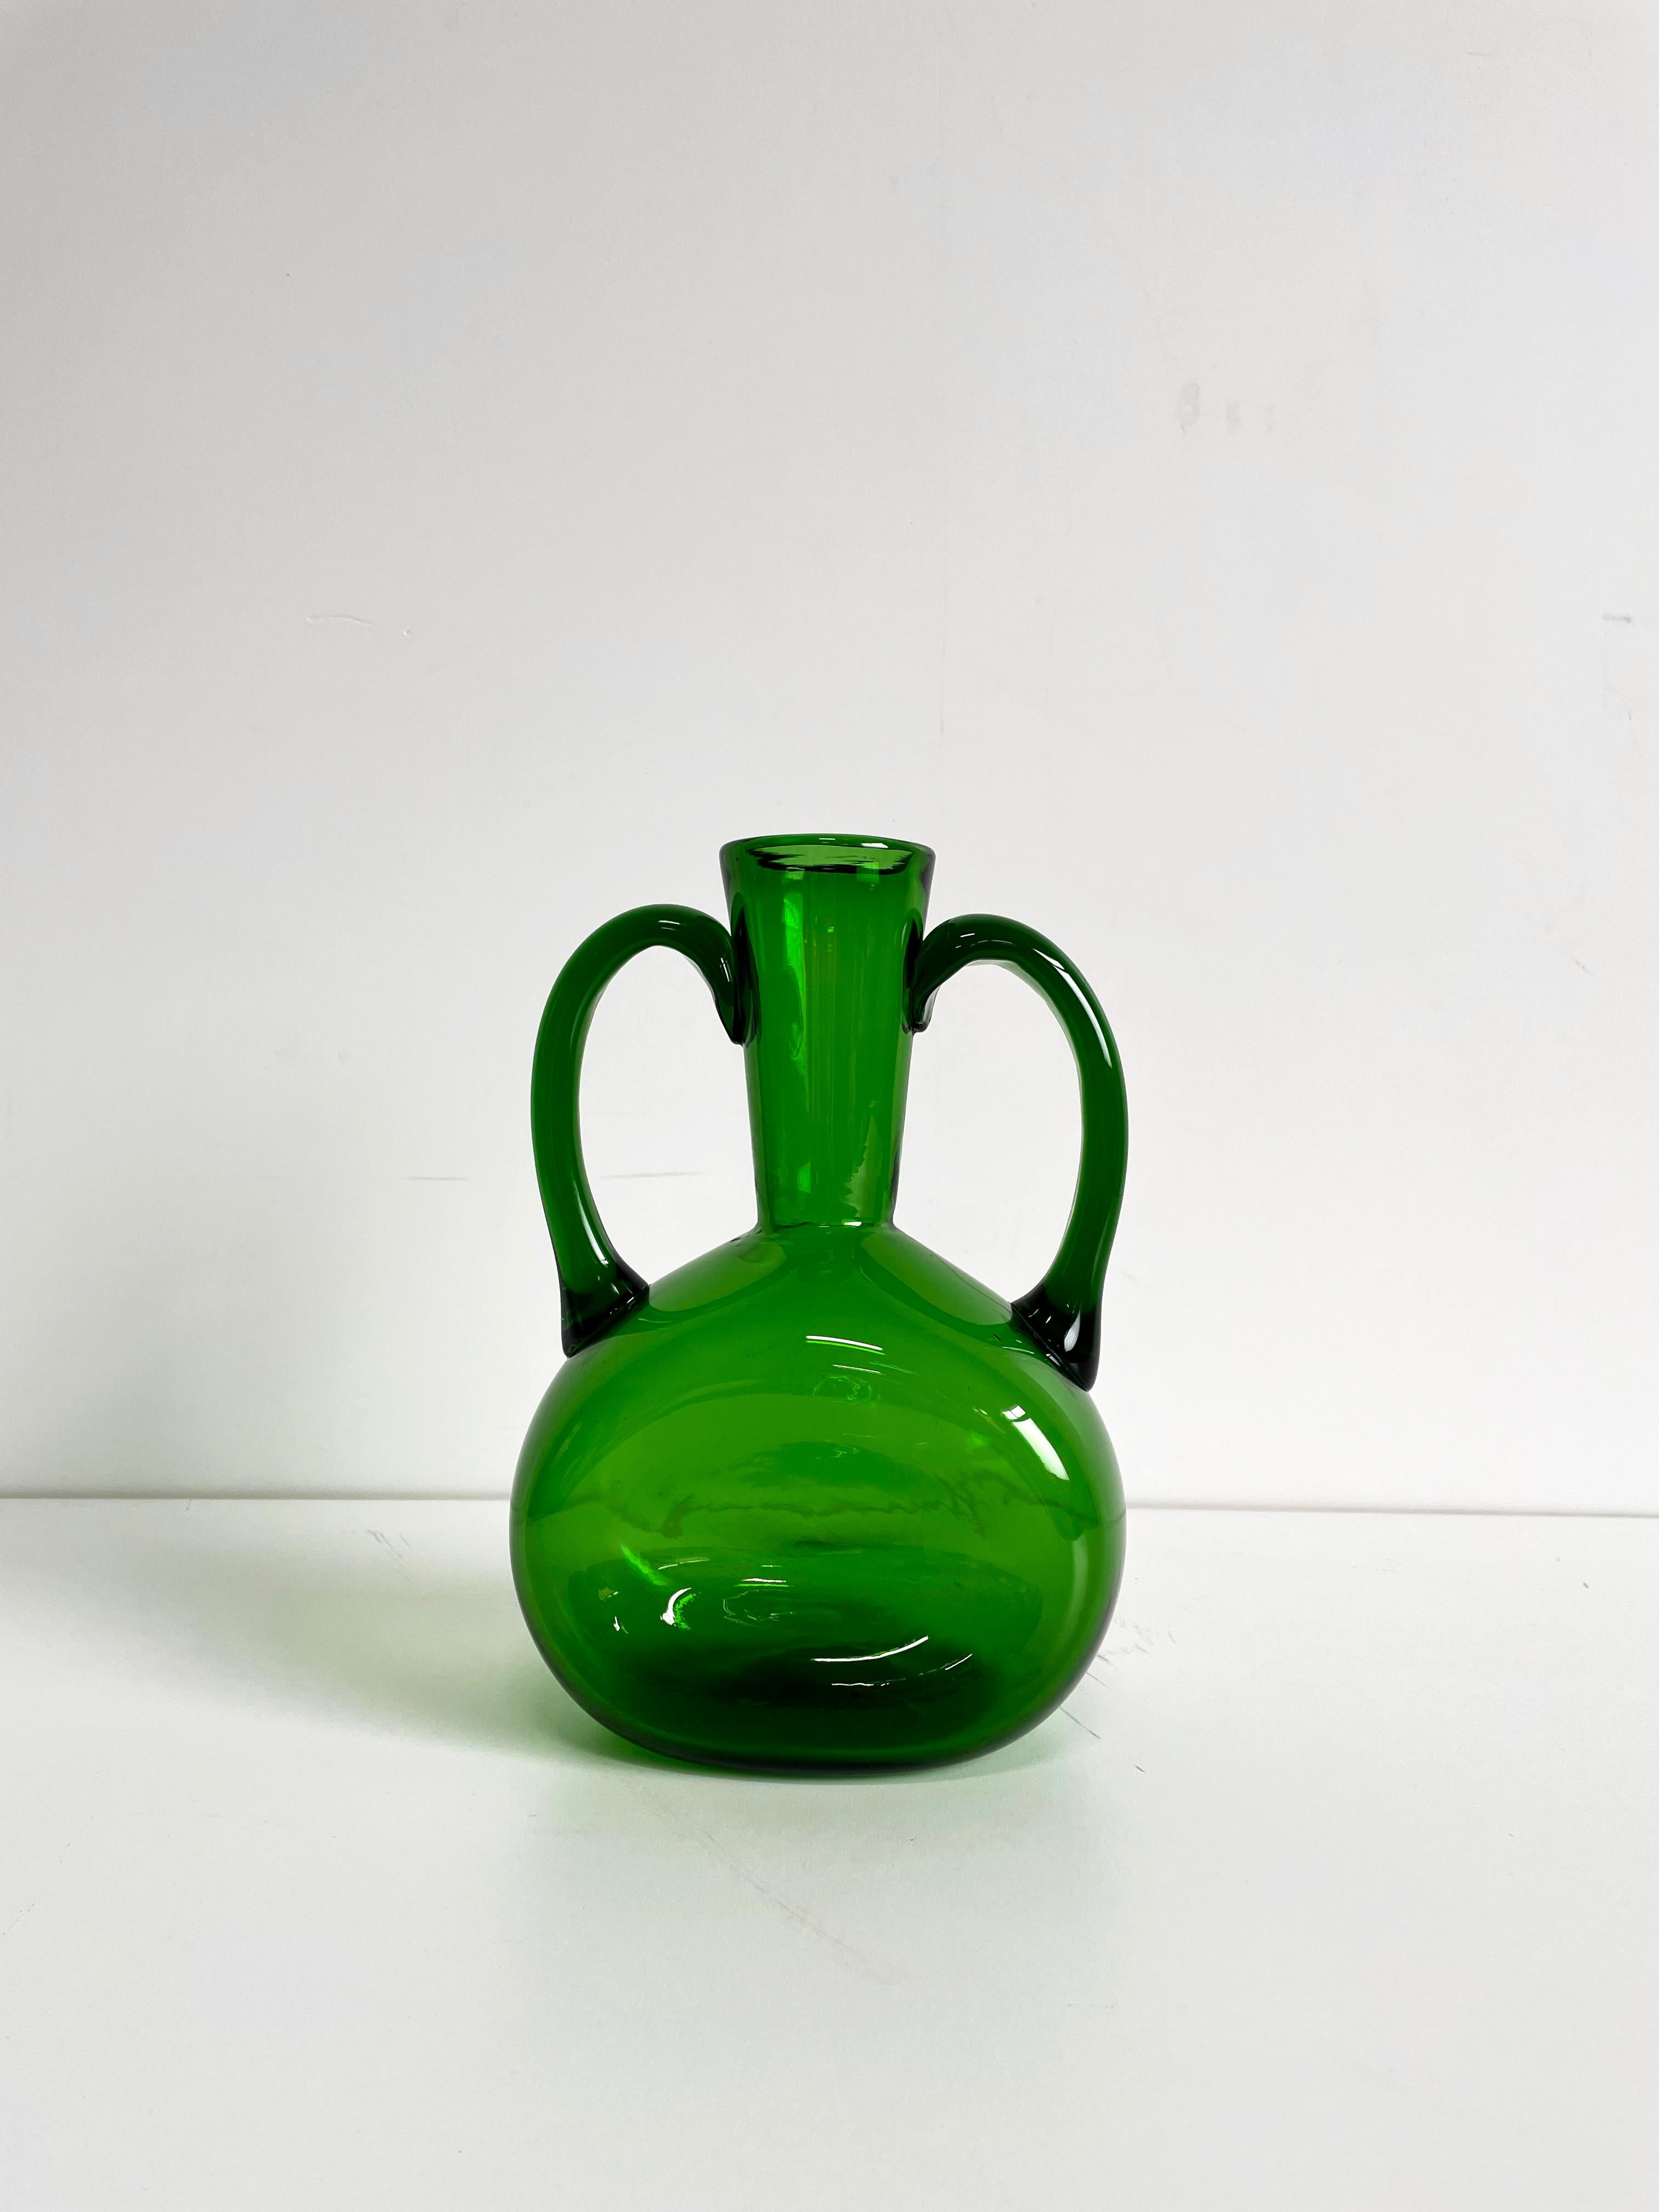 Stunning mid-century handblown glass vase in emerald green color

Scandinavian design, circa the 1960s/1970s

Size: 27 x 20 x 13 cm (H/W/D), Weight: 1.40 kg

The item is in very good vintage condition, without any damage.